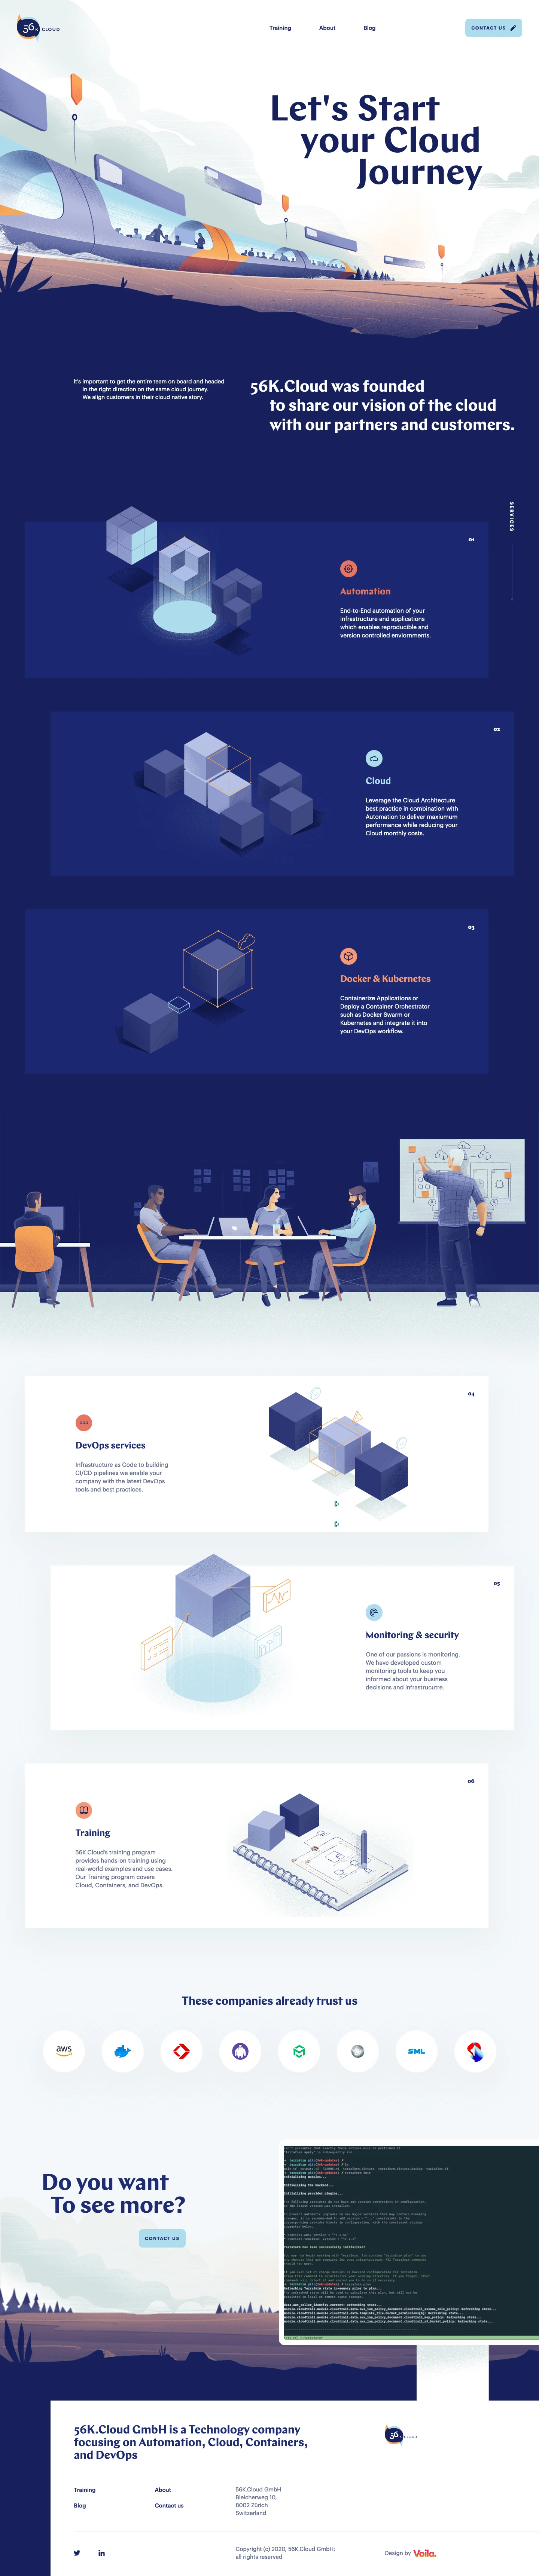 56K.Cloud Landing Page Example: 56K.Cloud was founded to share our vision of the cloud with our partners and customers. It's important to get the entire team on board and headed in the right direction on the same cloud journey. We align customers in their cloud native story.